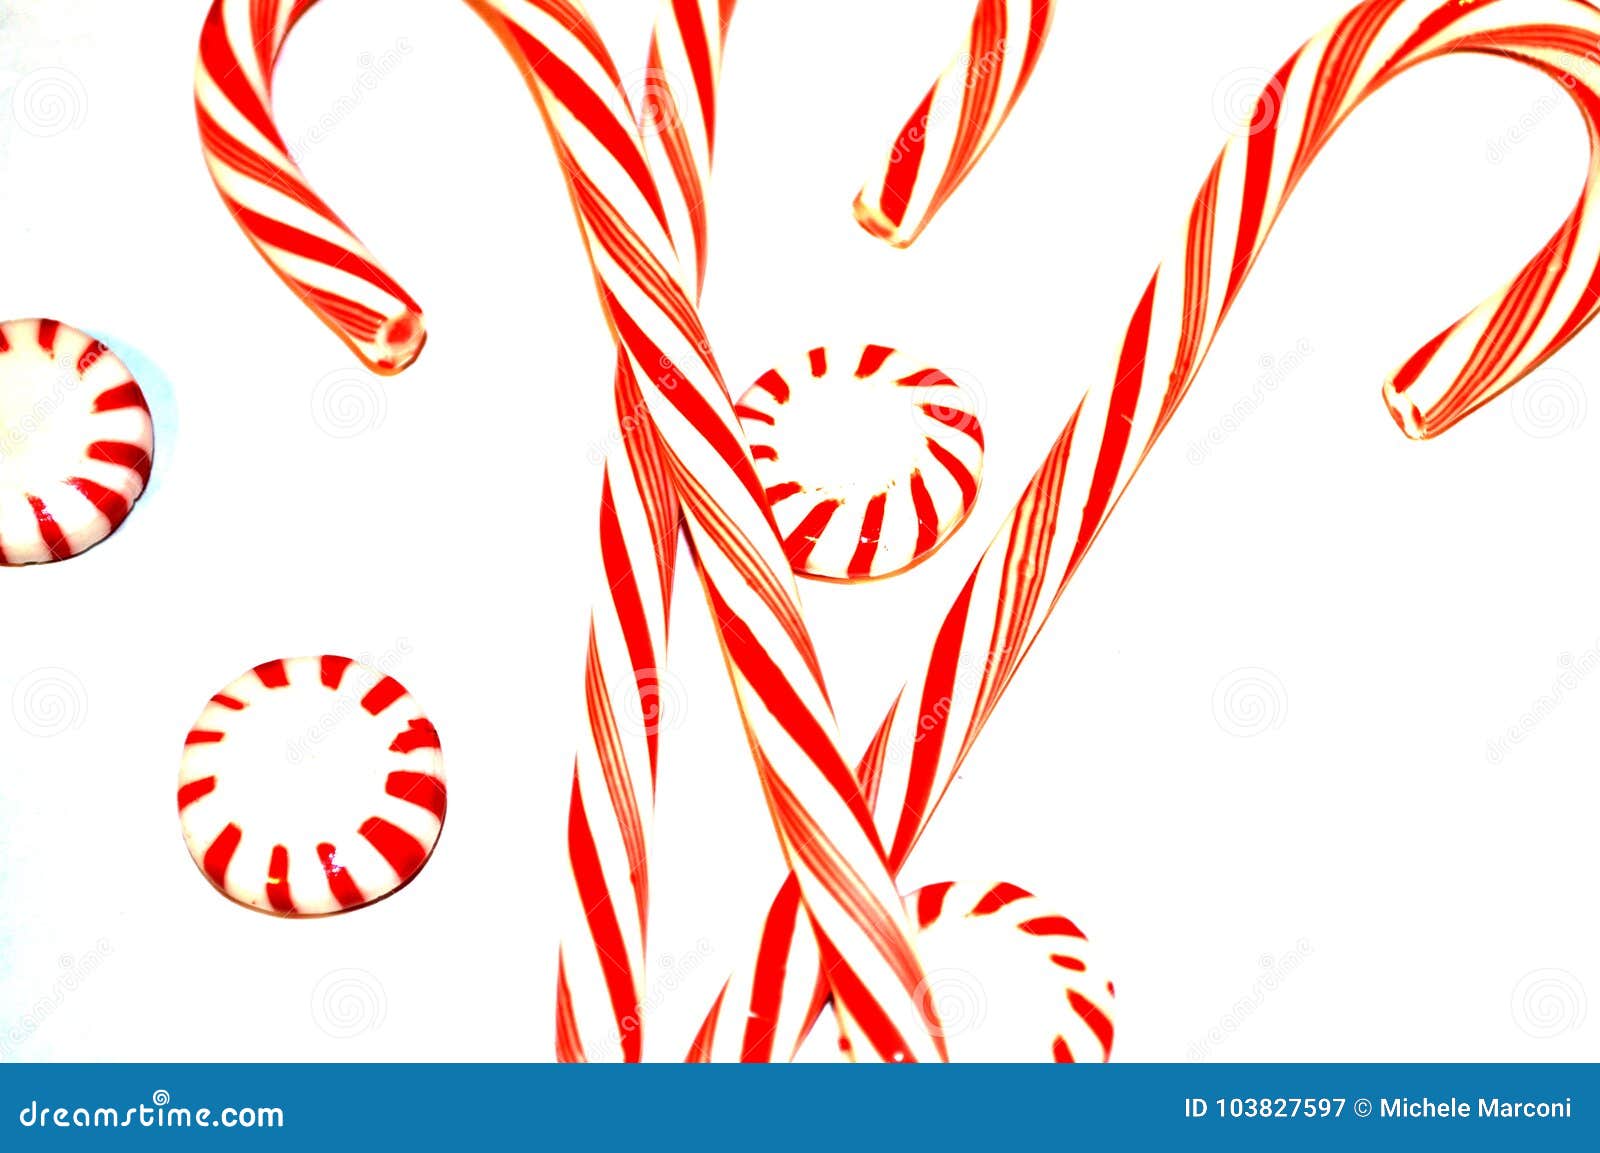 Three Red and White Striped mint flavor Candy Cane Traditional Christmas Holiday Candy that Santa Claus brings and is hung on the Christmas Tree